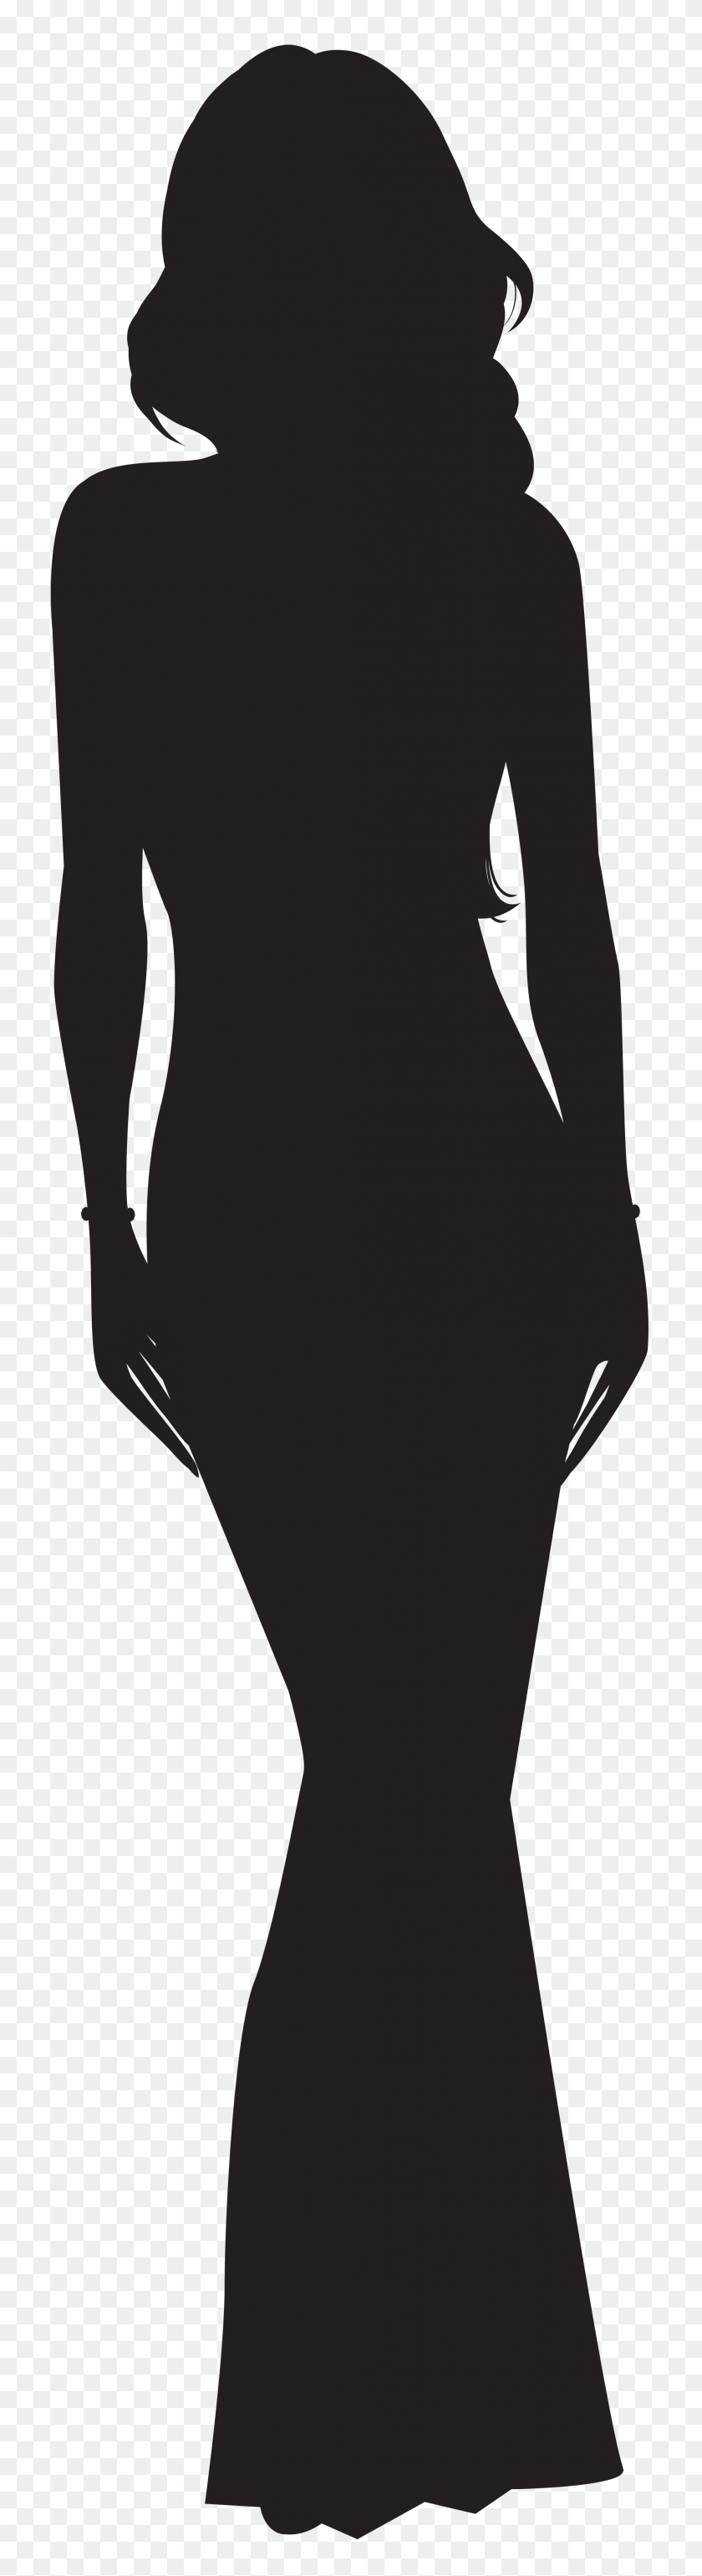 2065x8000 Woman Silhouette Clipart - Softball Player Silhouette Clipart